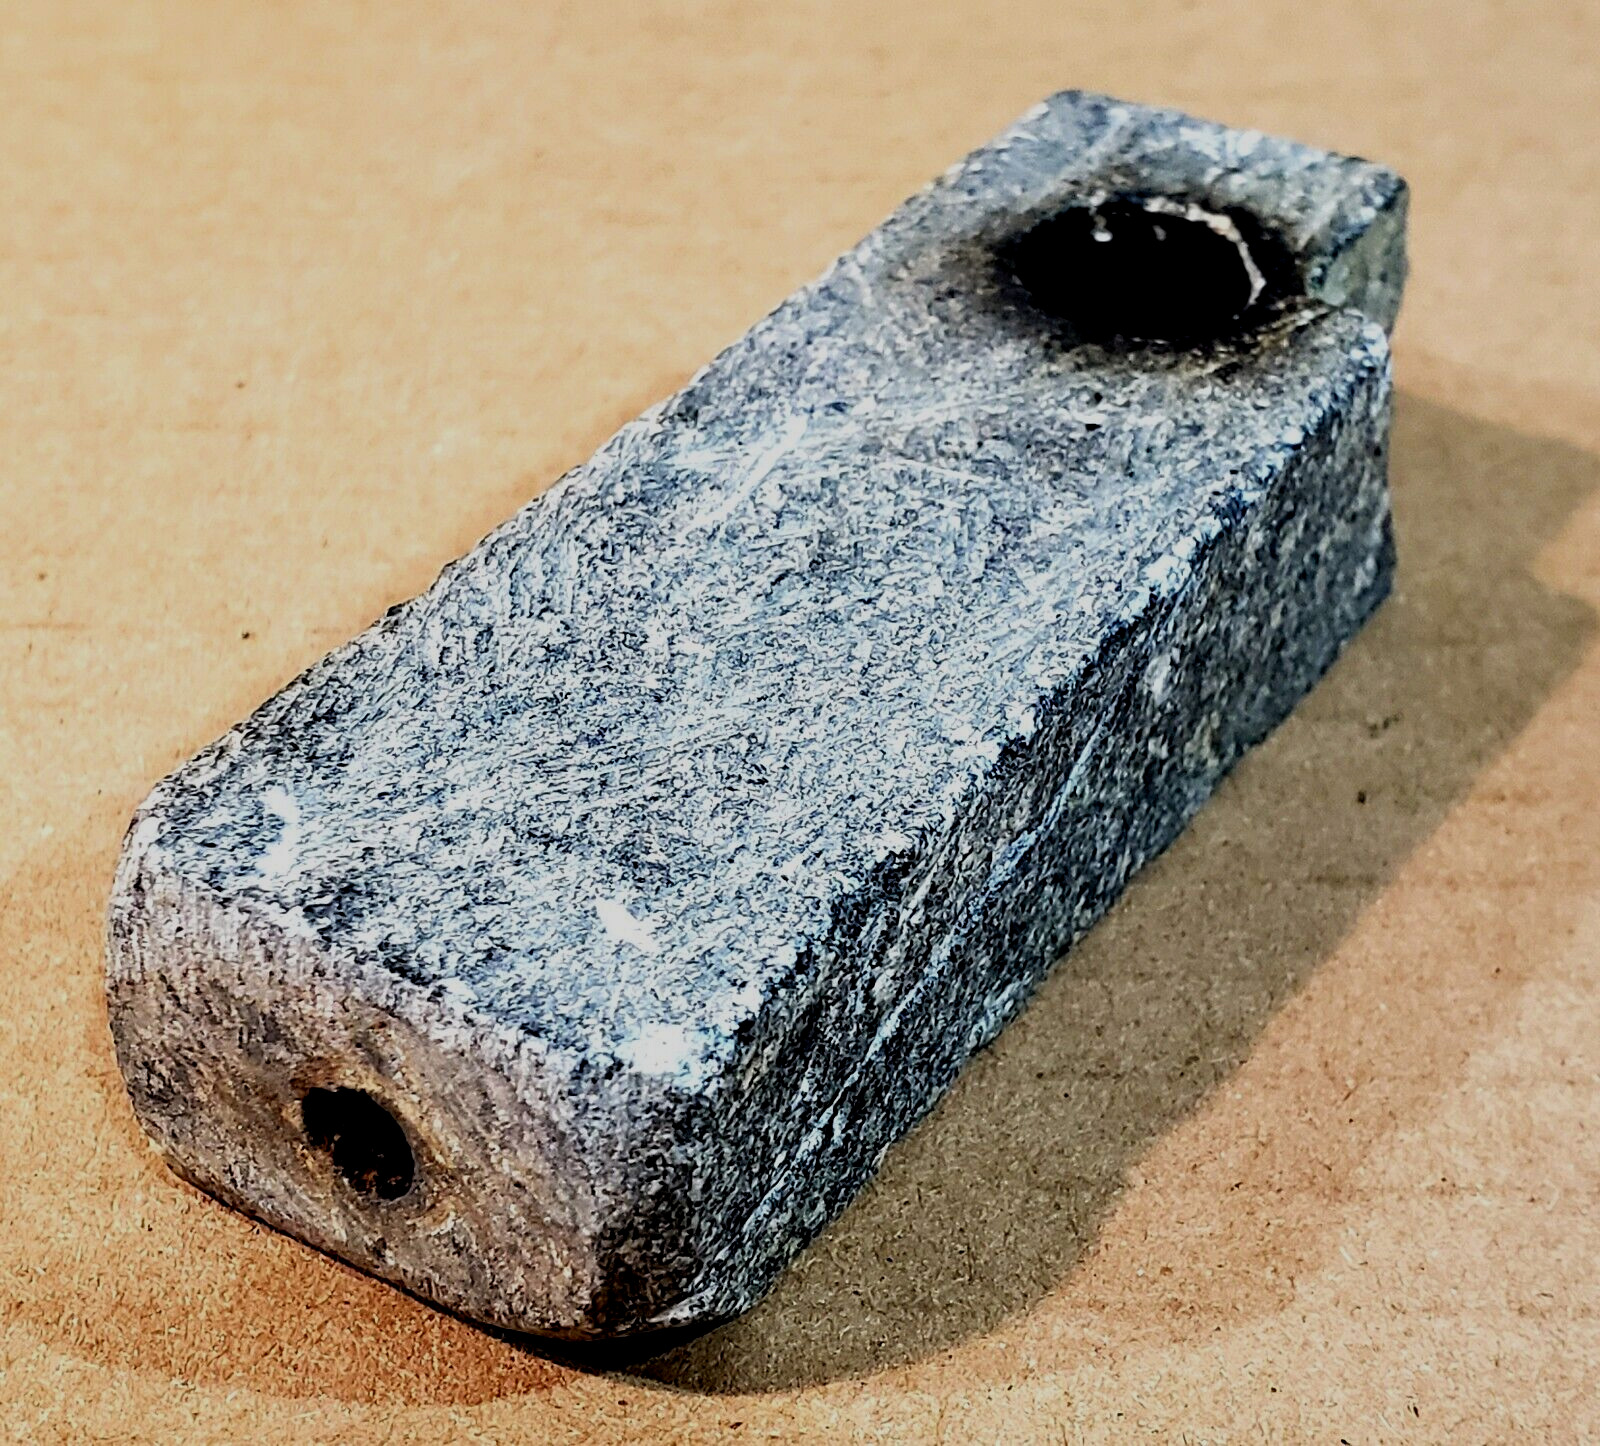 Vintage Old Smoking Pipe Carved From A Block Of Granite. Old Tobacco Pipe. 